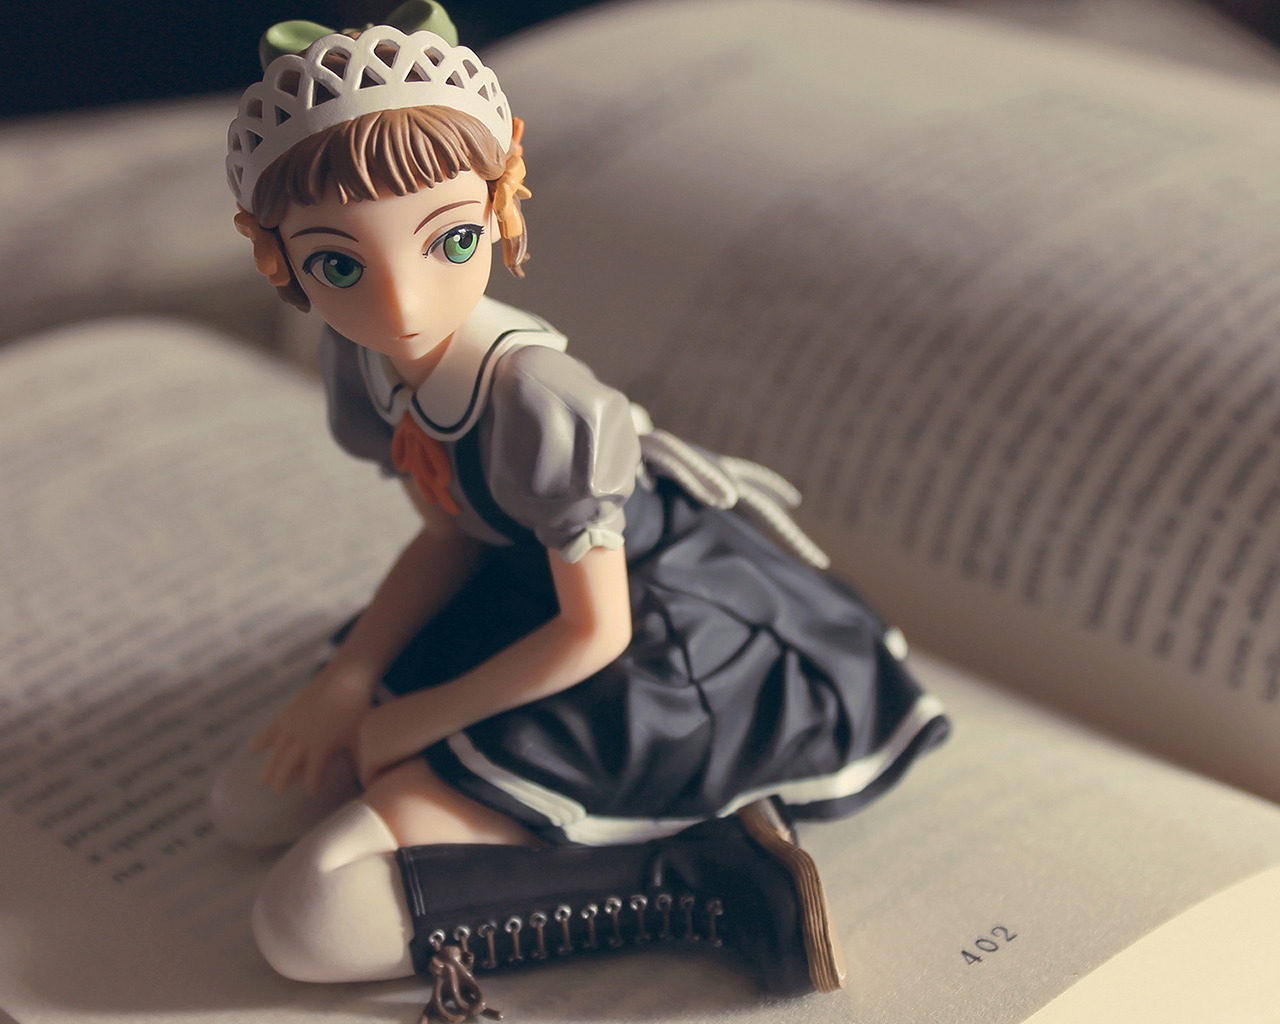 Cute Little Figurine for 1280 x 1024 resolution